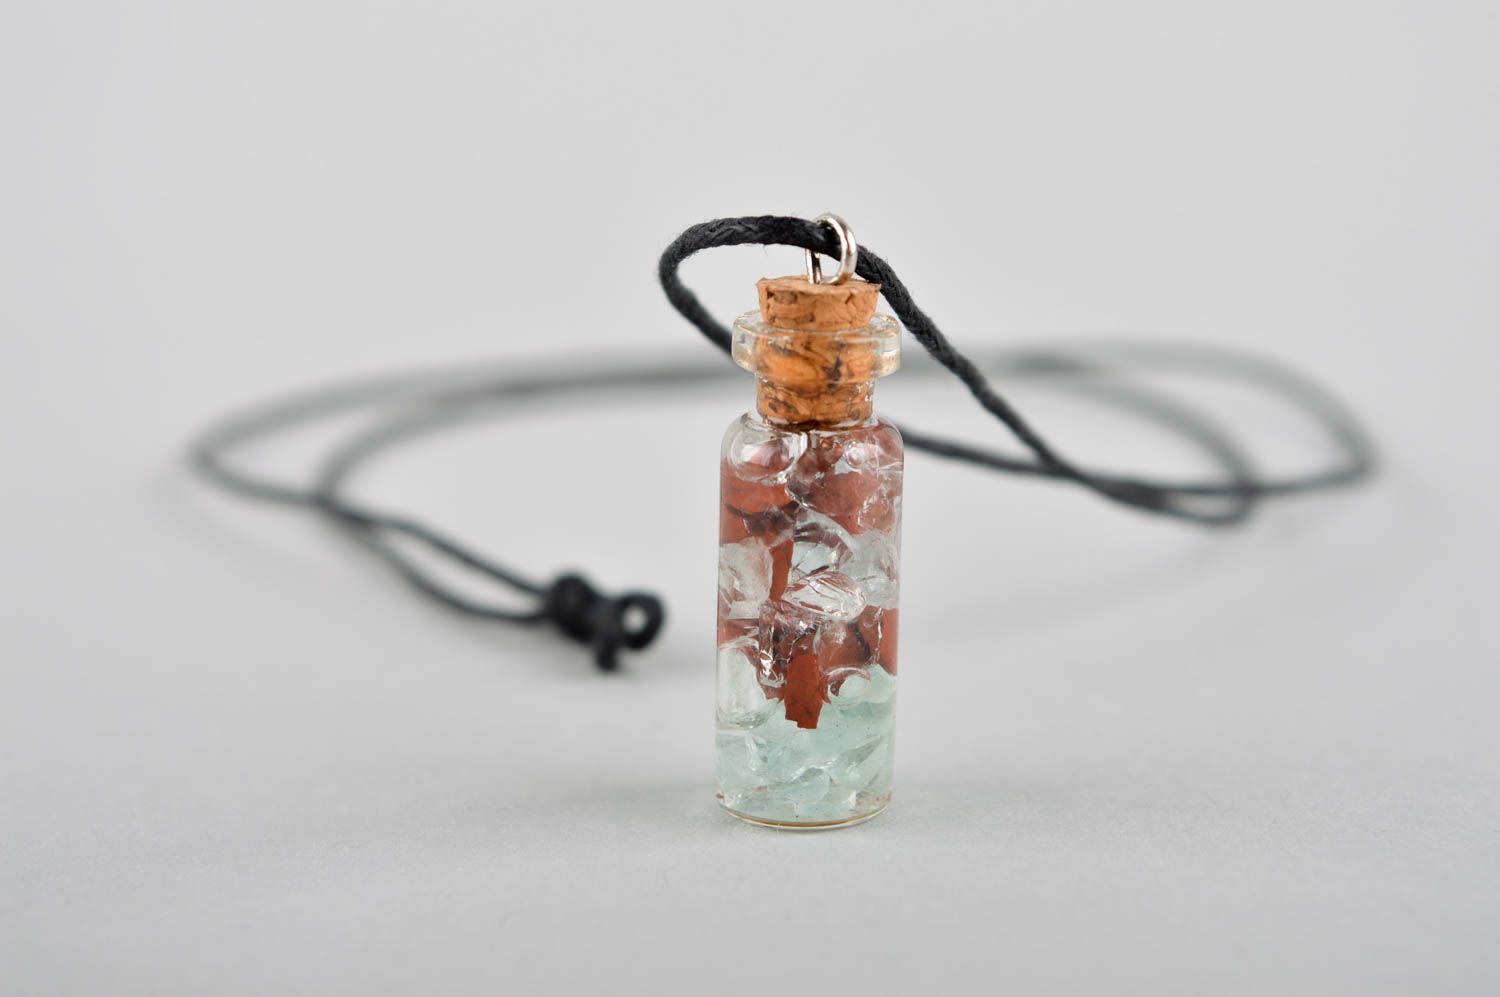 Handcrafted jewelry glass vial charm pendant necklace designer glass jewelry  photo 4